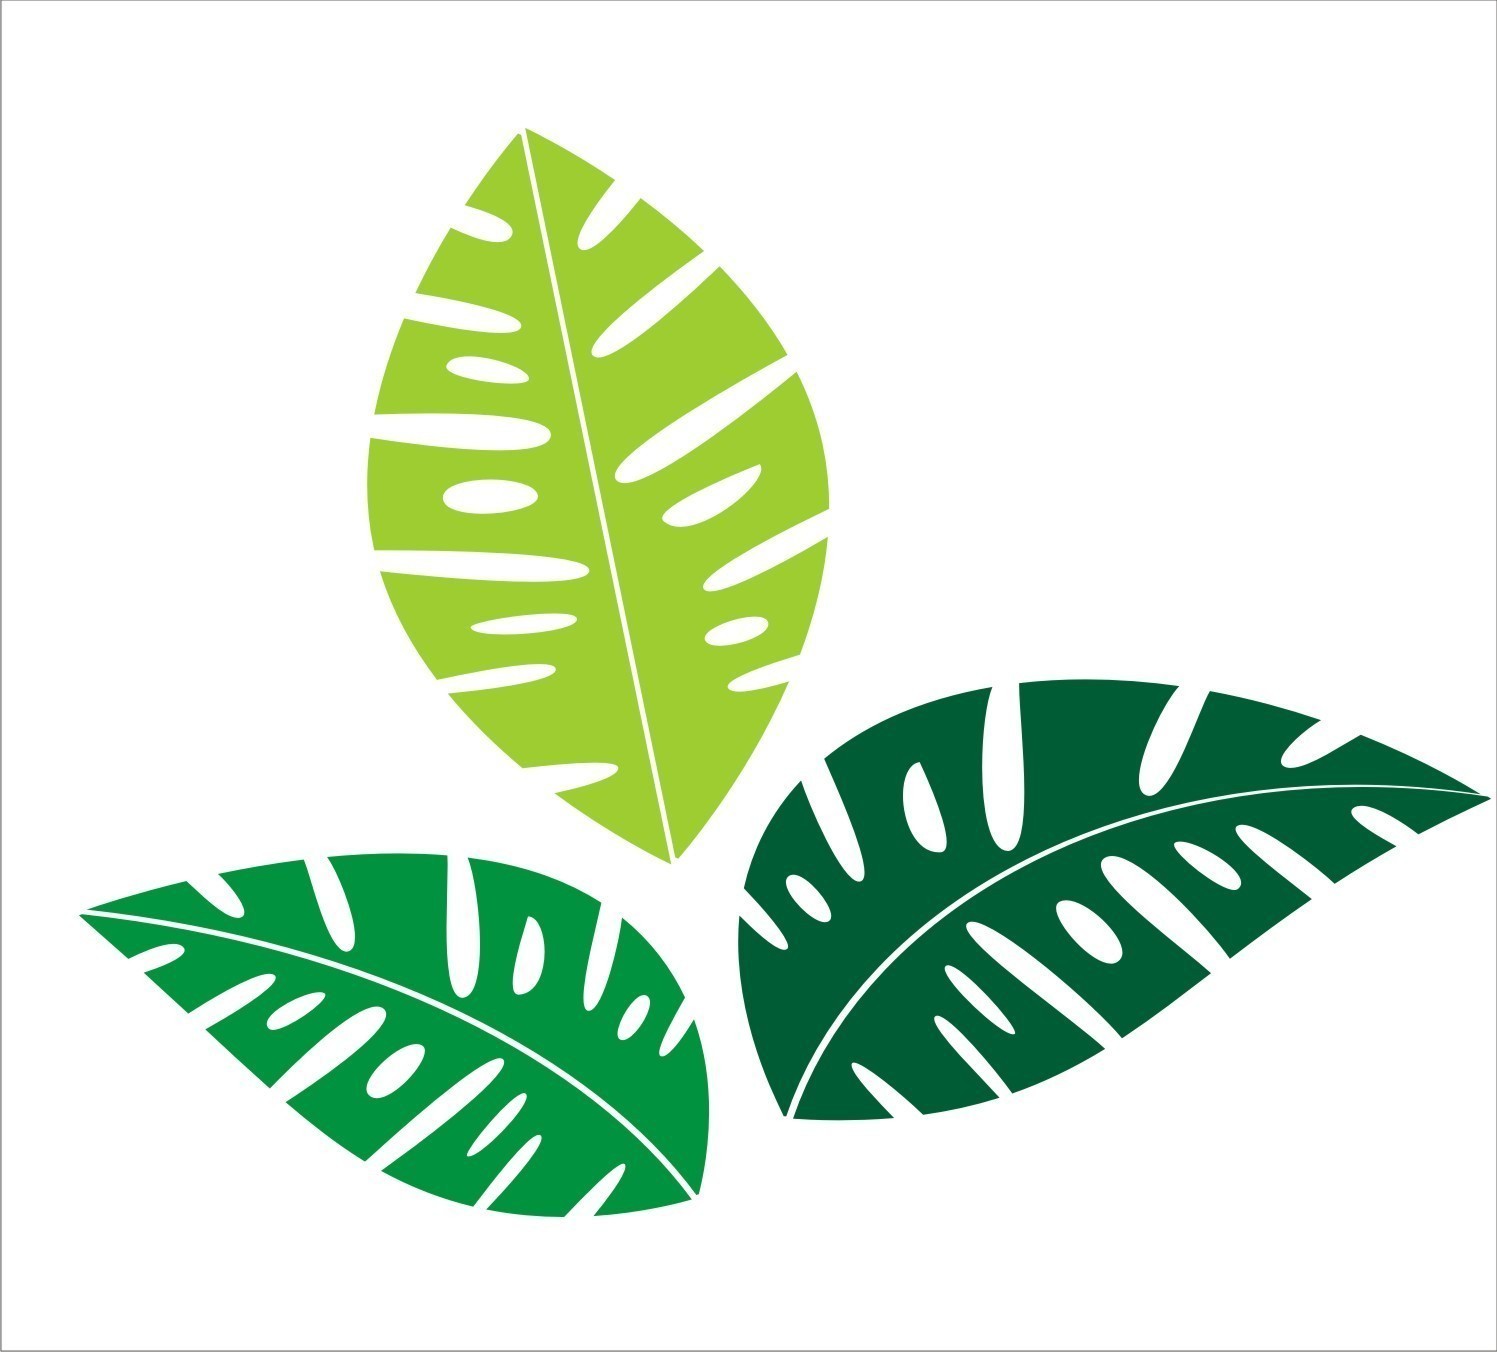 clipart leaves tropical